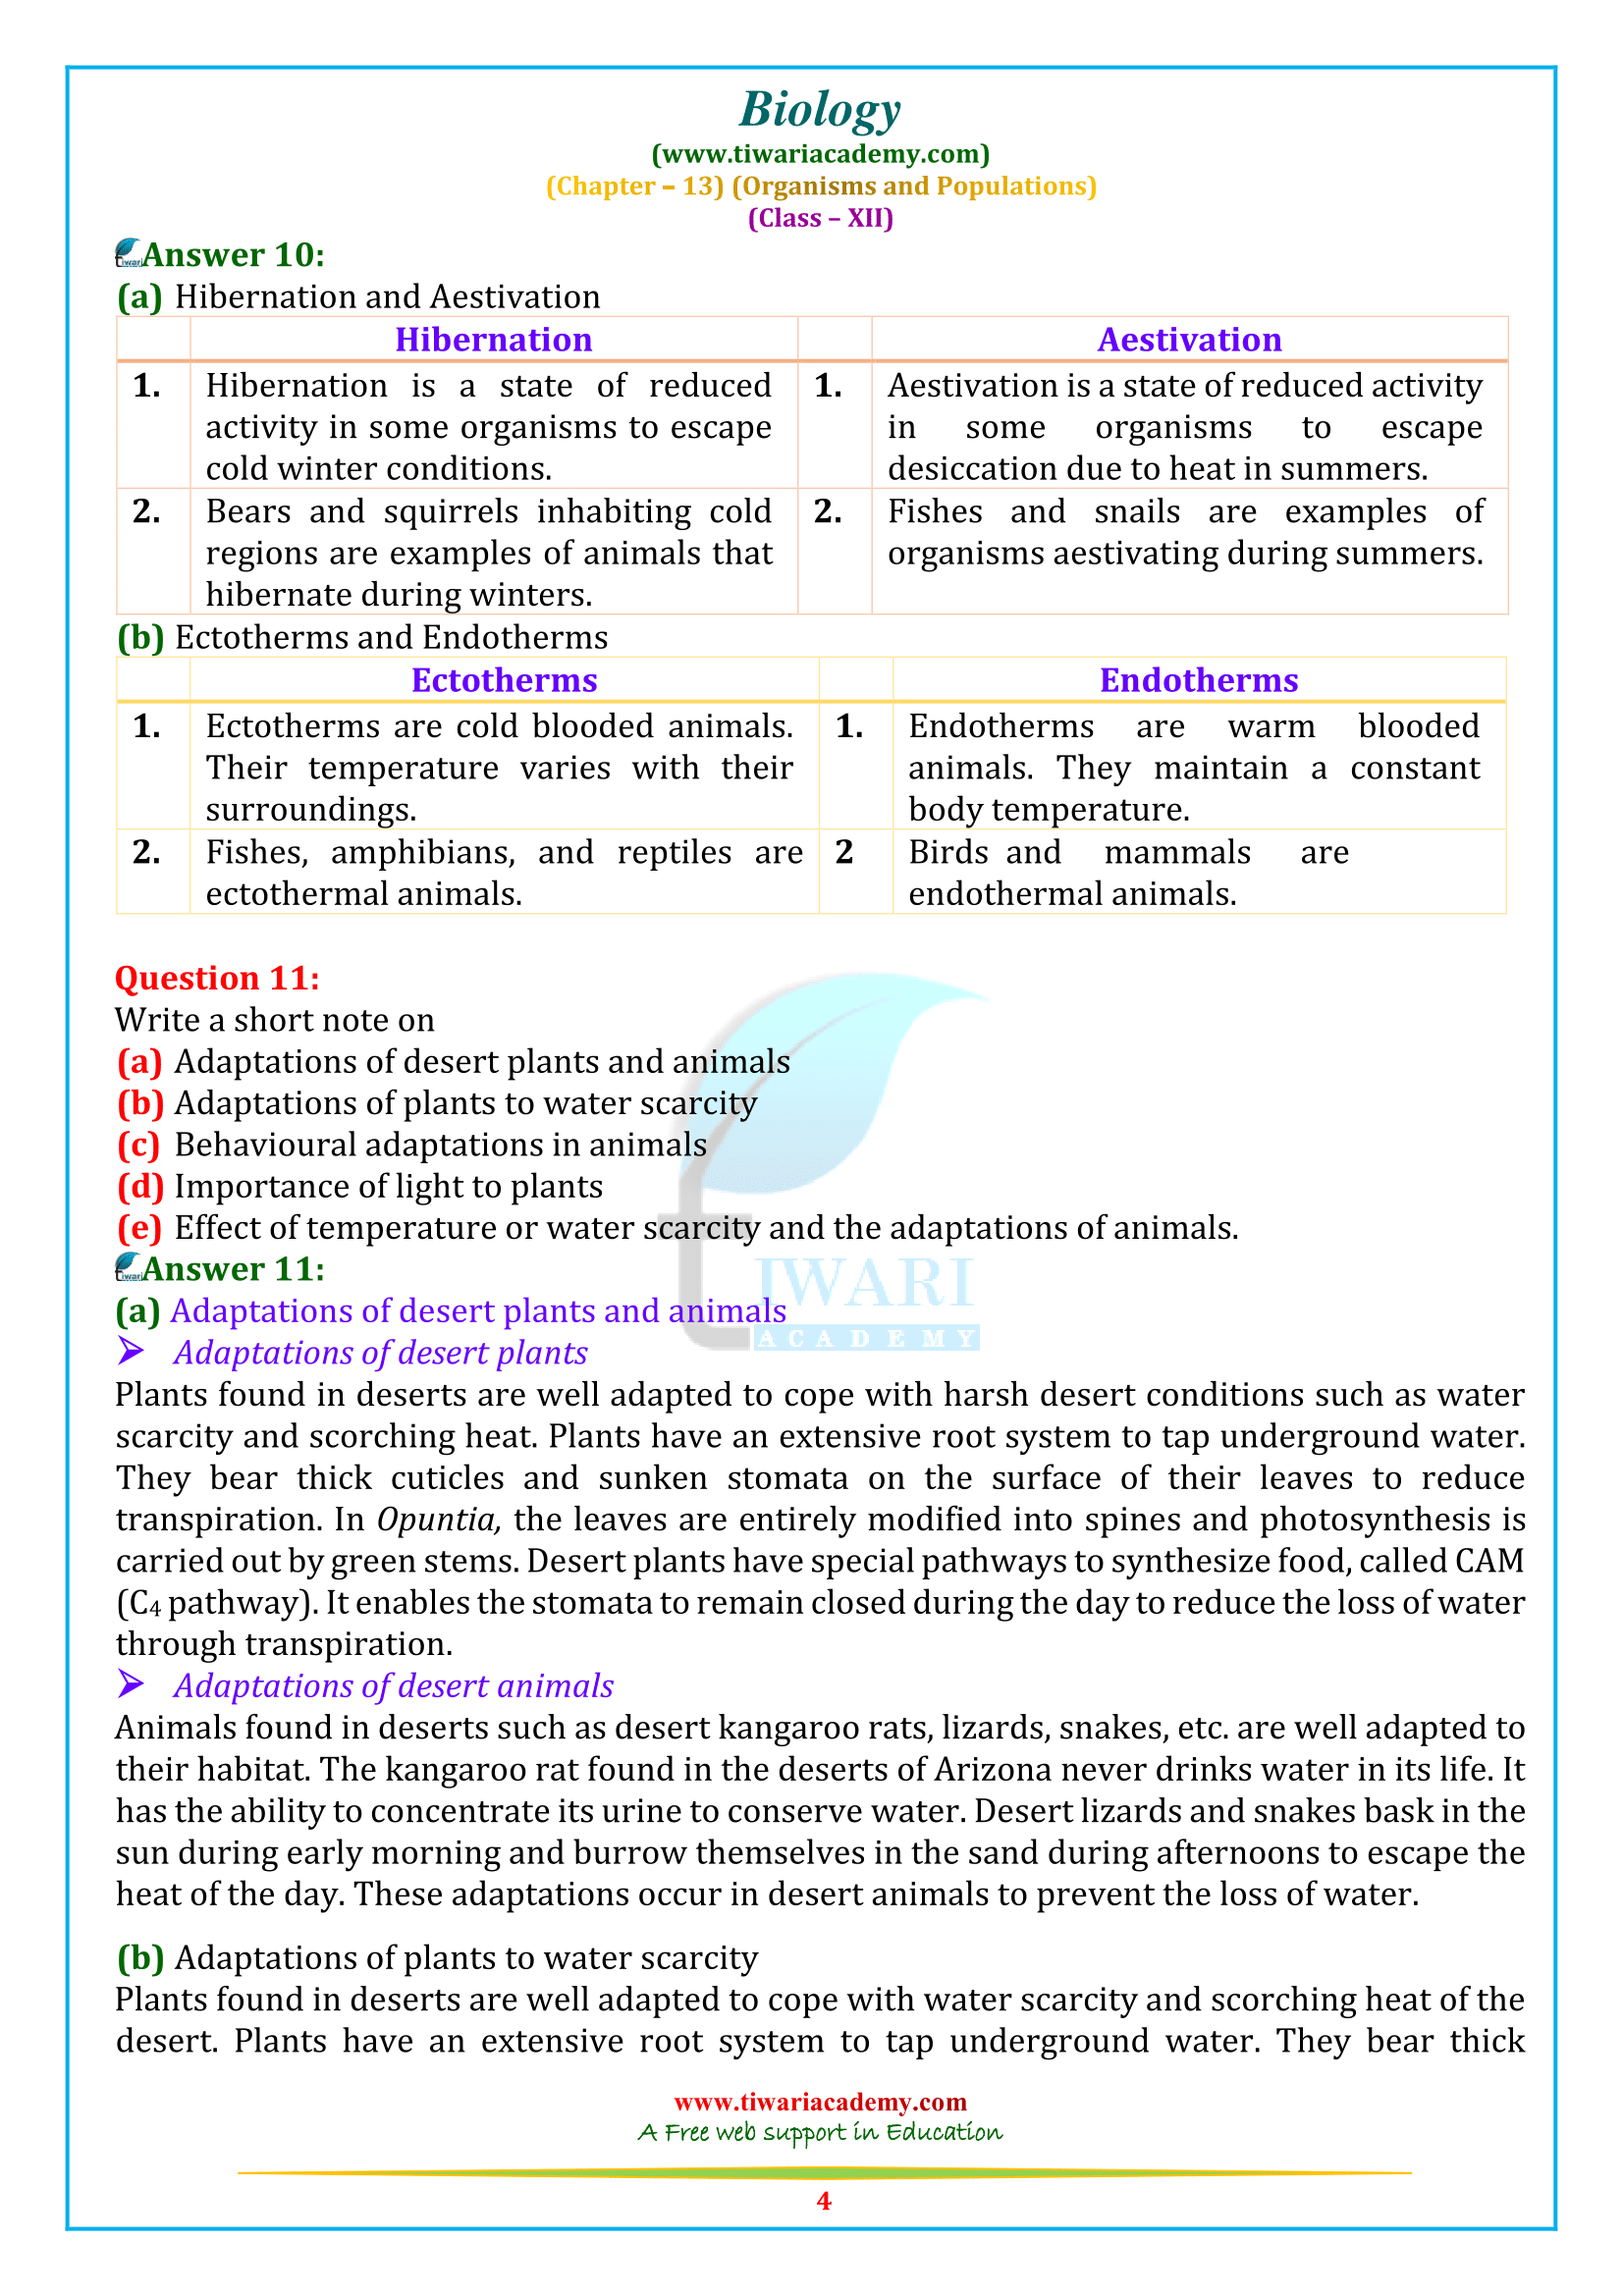 NCERT Solutions for Class 12 Biology Chapter 13 in English Medium